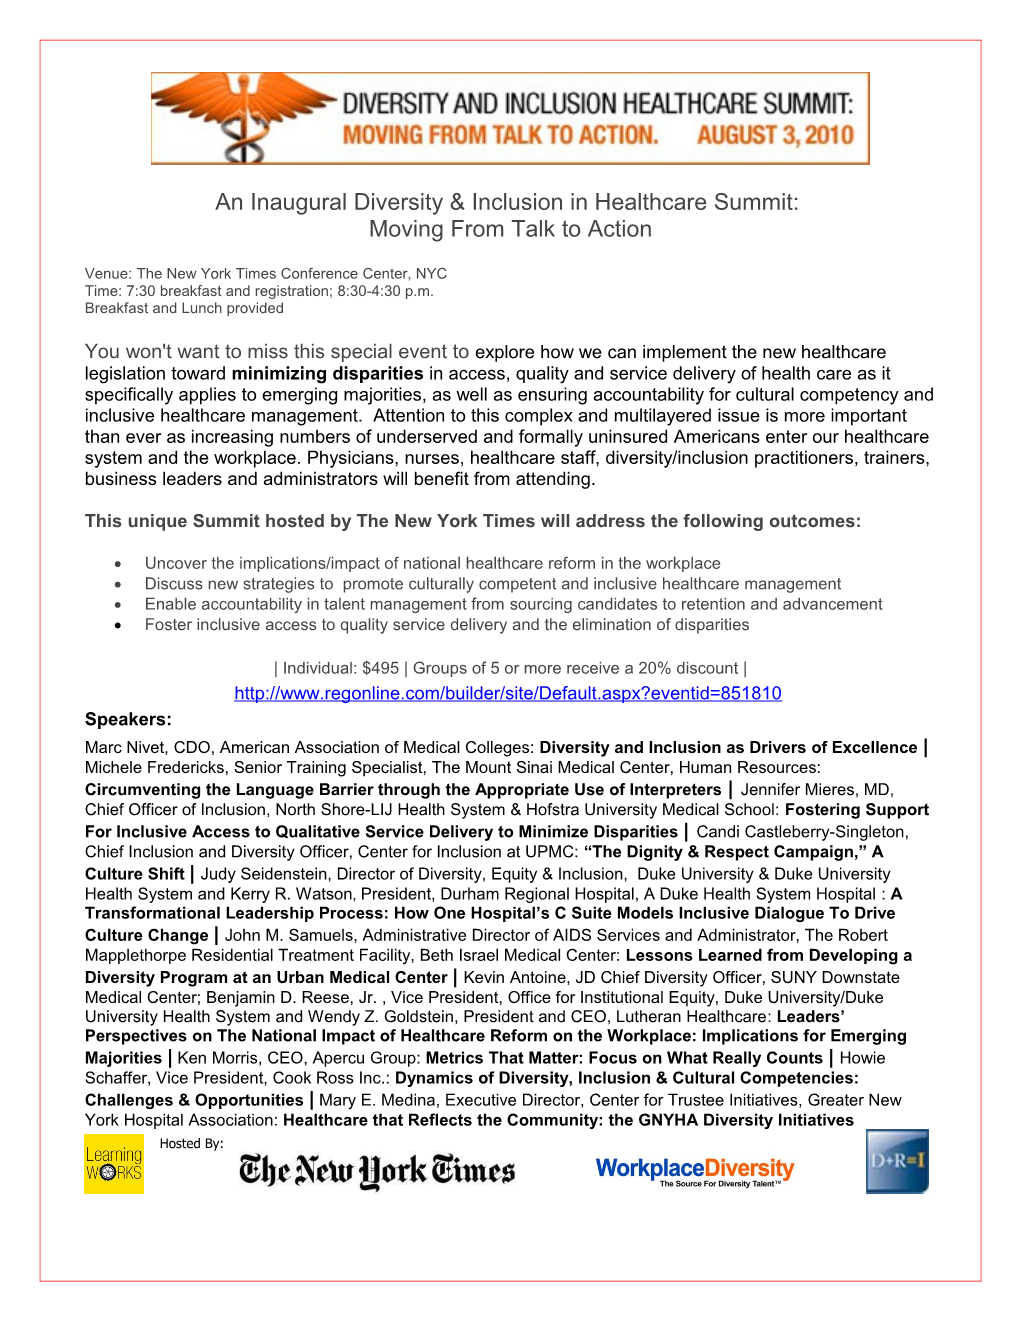 An Inaugural Diversity & Inclusion in Healthcare Summit: Moving from Talk to Action